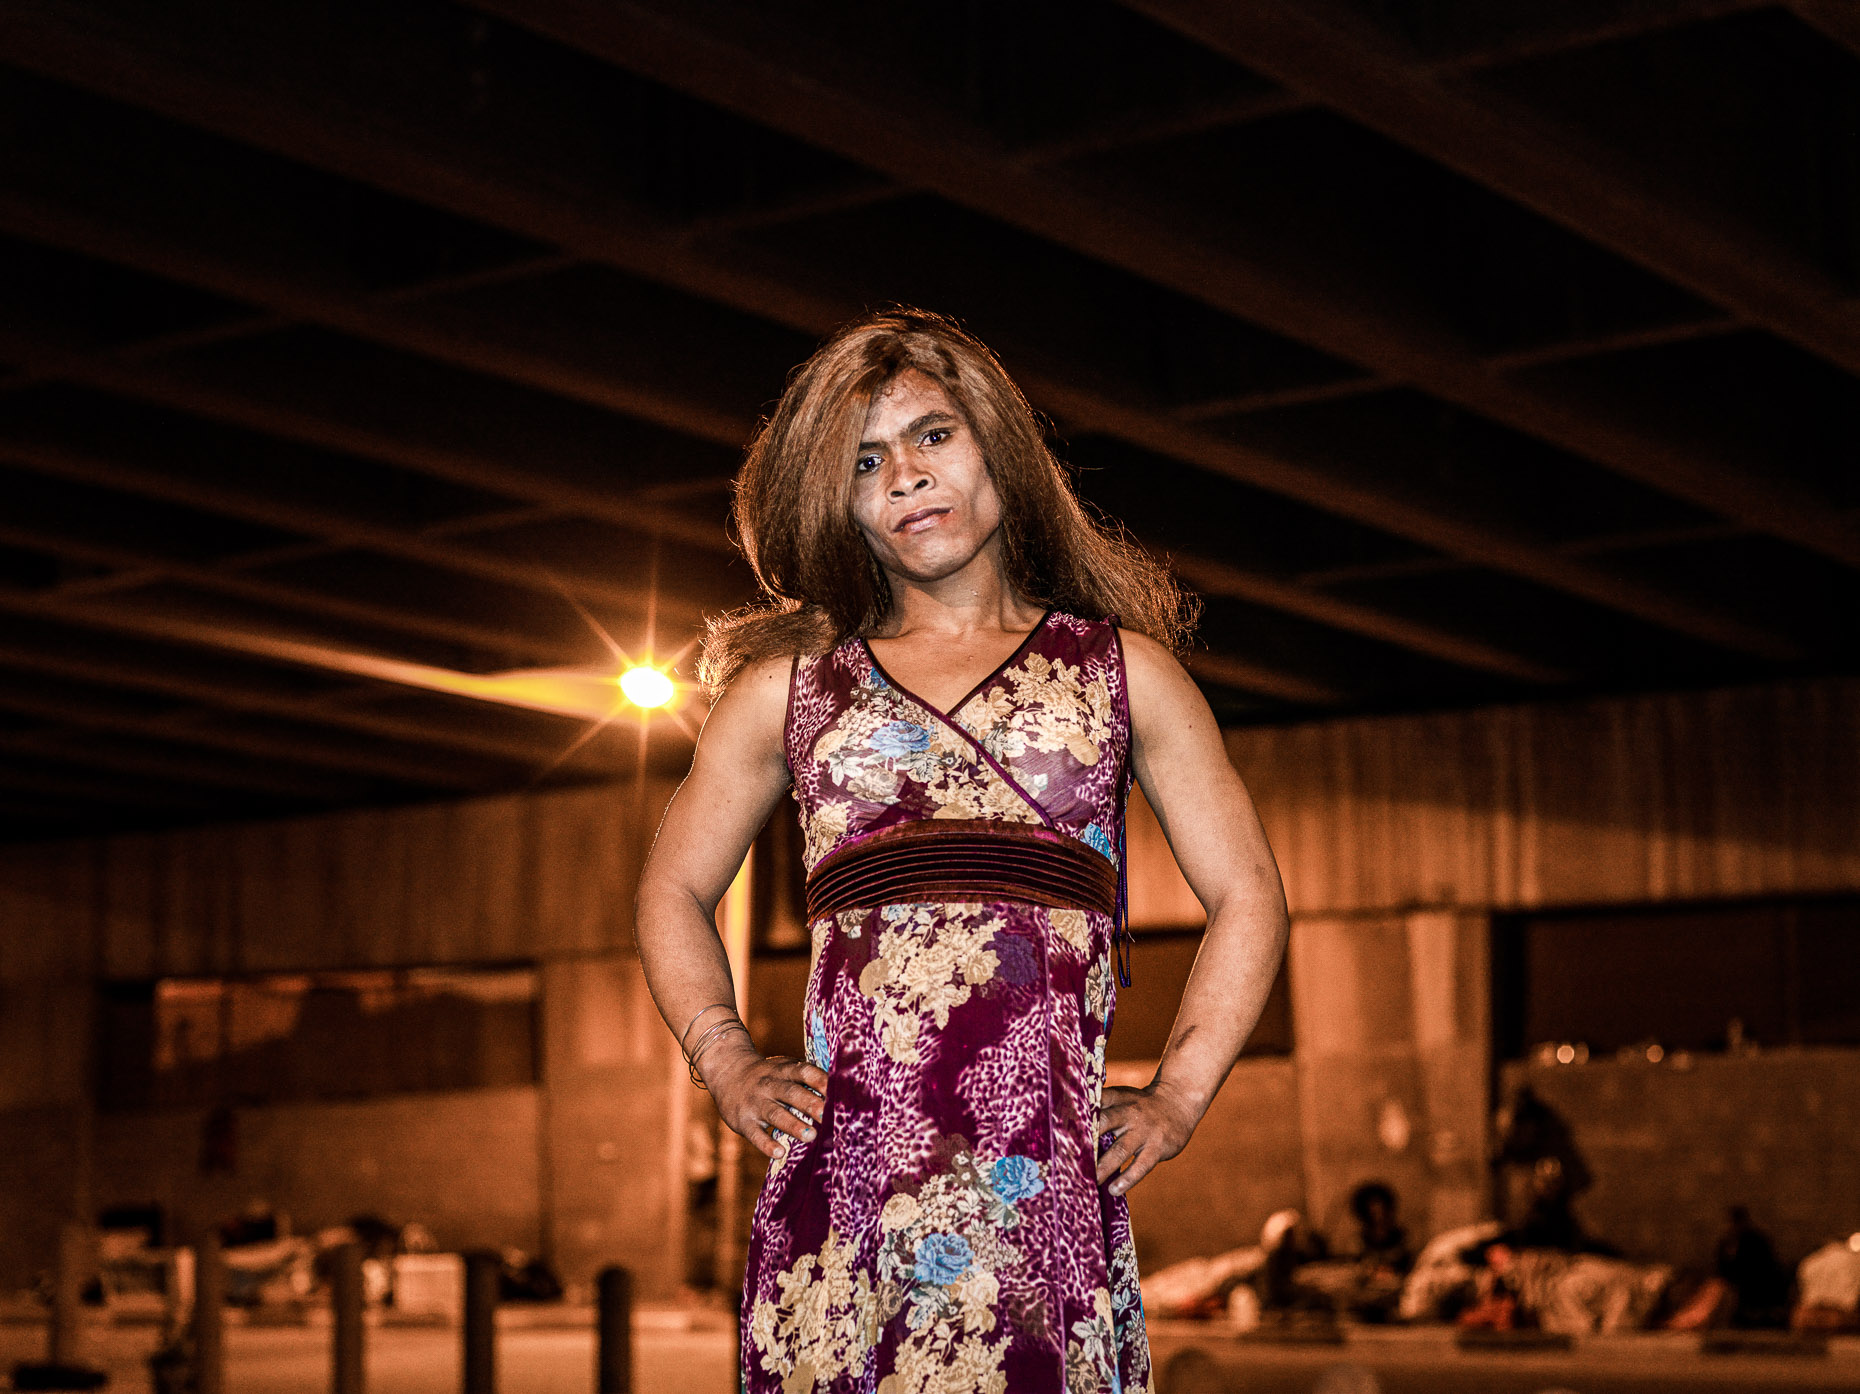 Trans woman with  a long  auburn wig  posing to have her portrait taken.